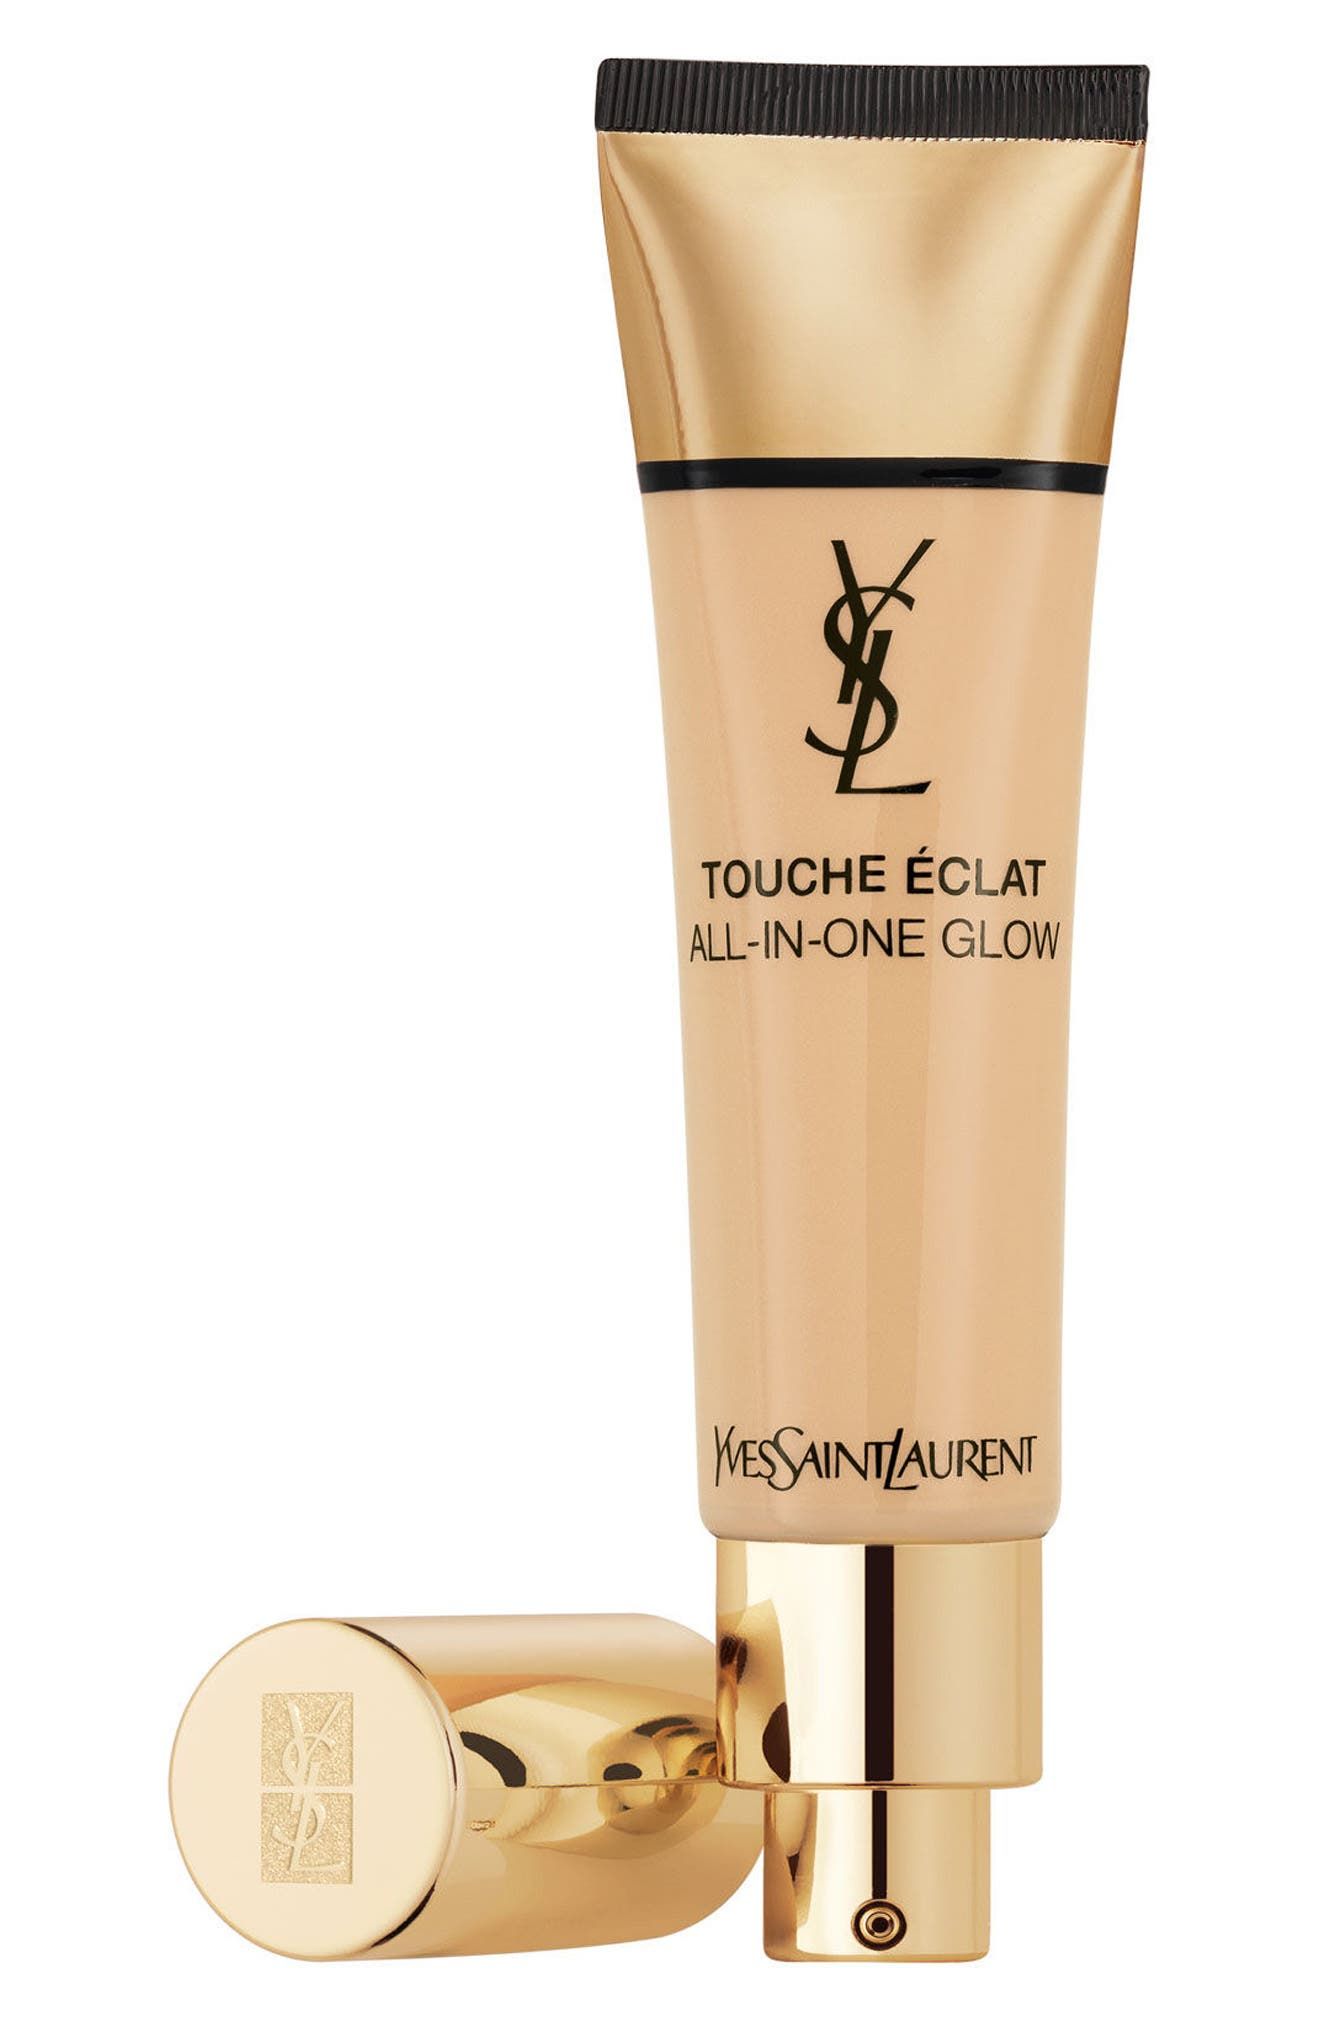 Yves Saint Laurent Touche Éclat All-In-One Glow Liquid Foundation Broad Spectrum SPF 23